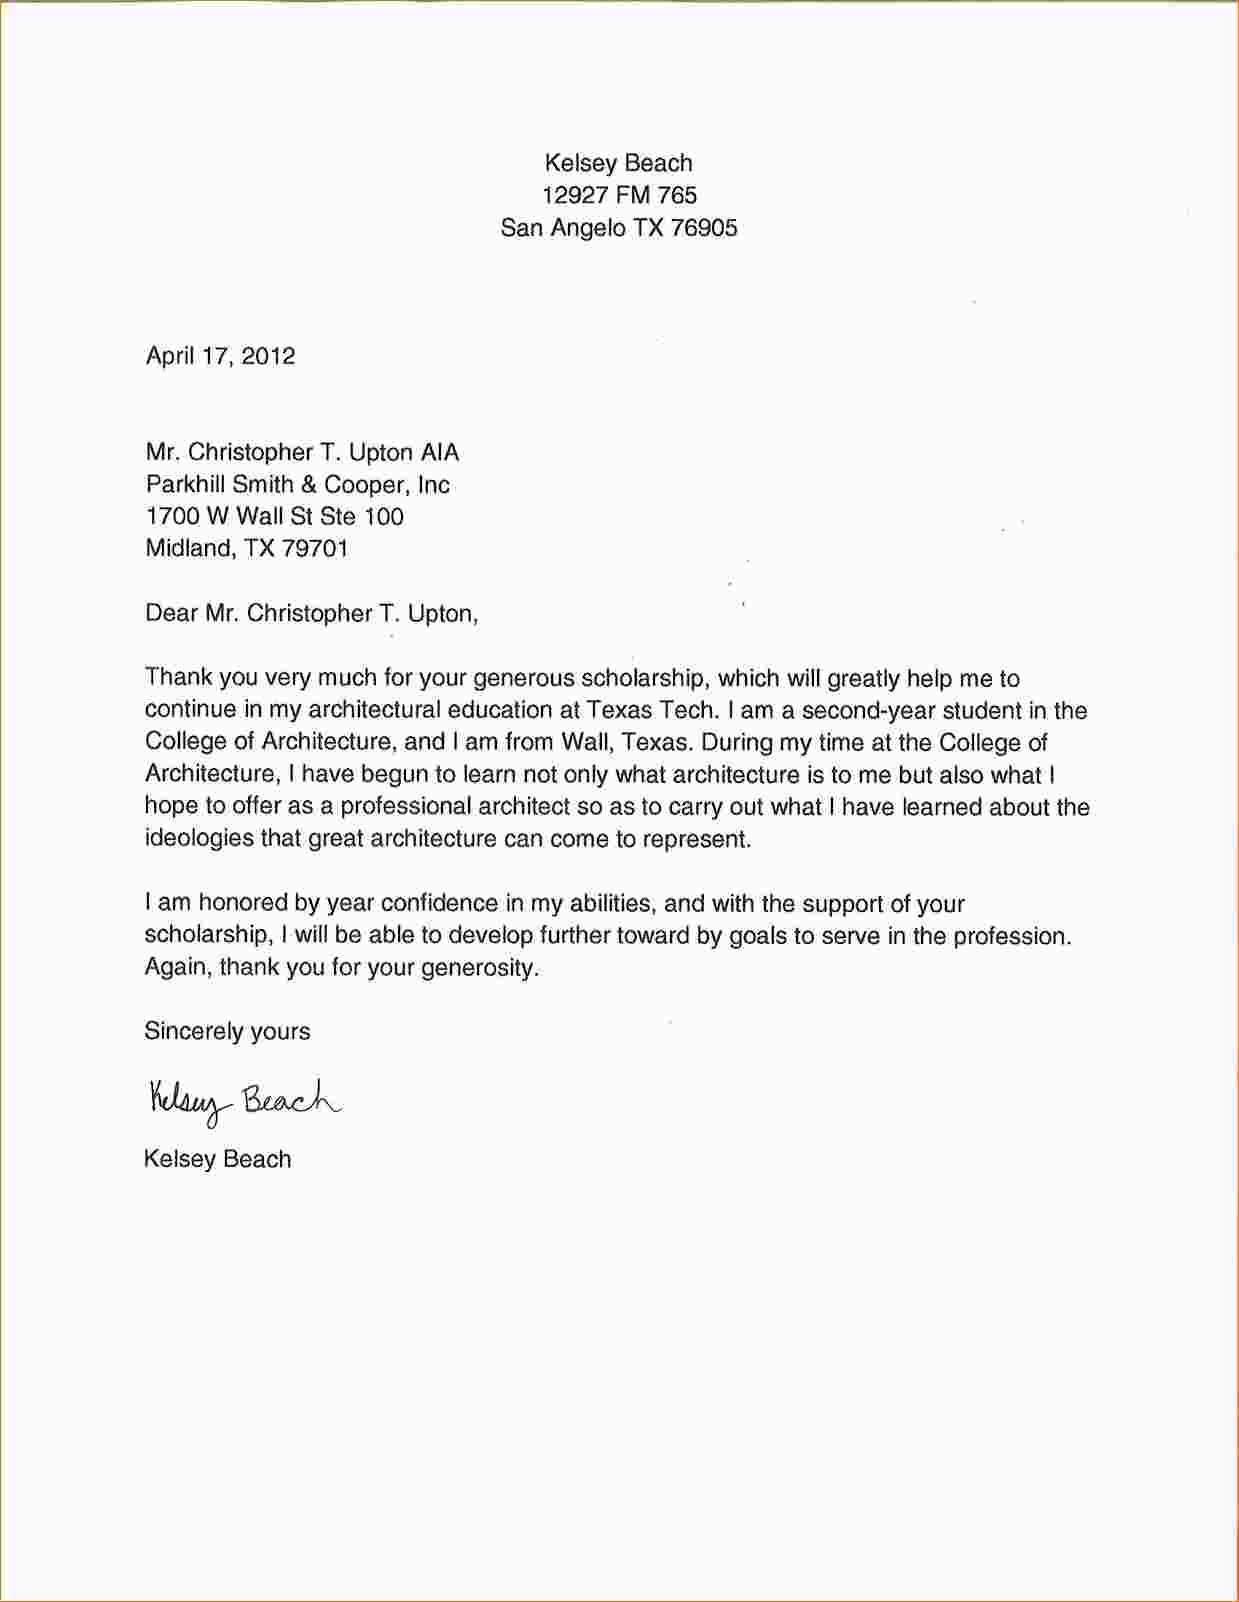 Scholarship Thank You Letter Template - How to format A Thank You Letter Acurnamedia